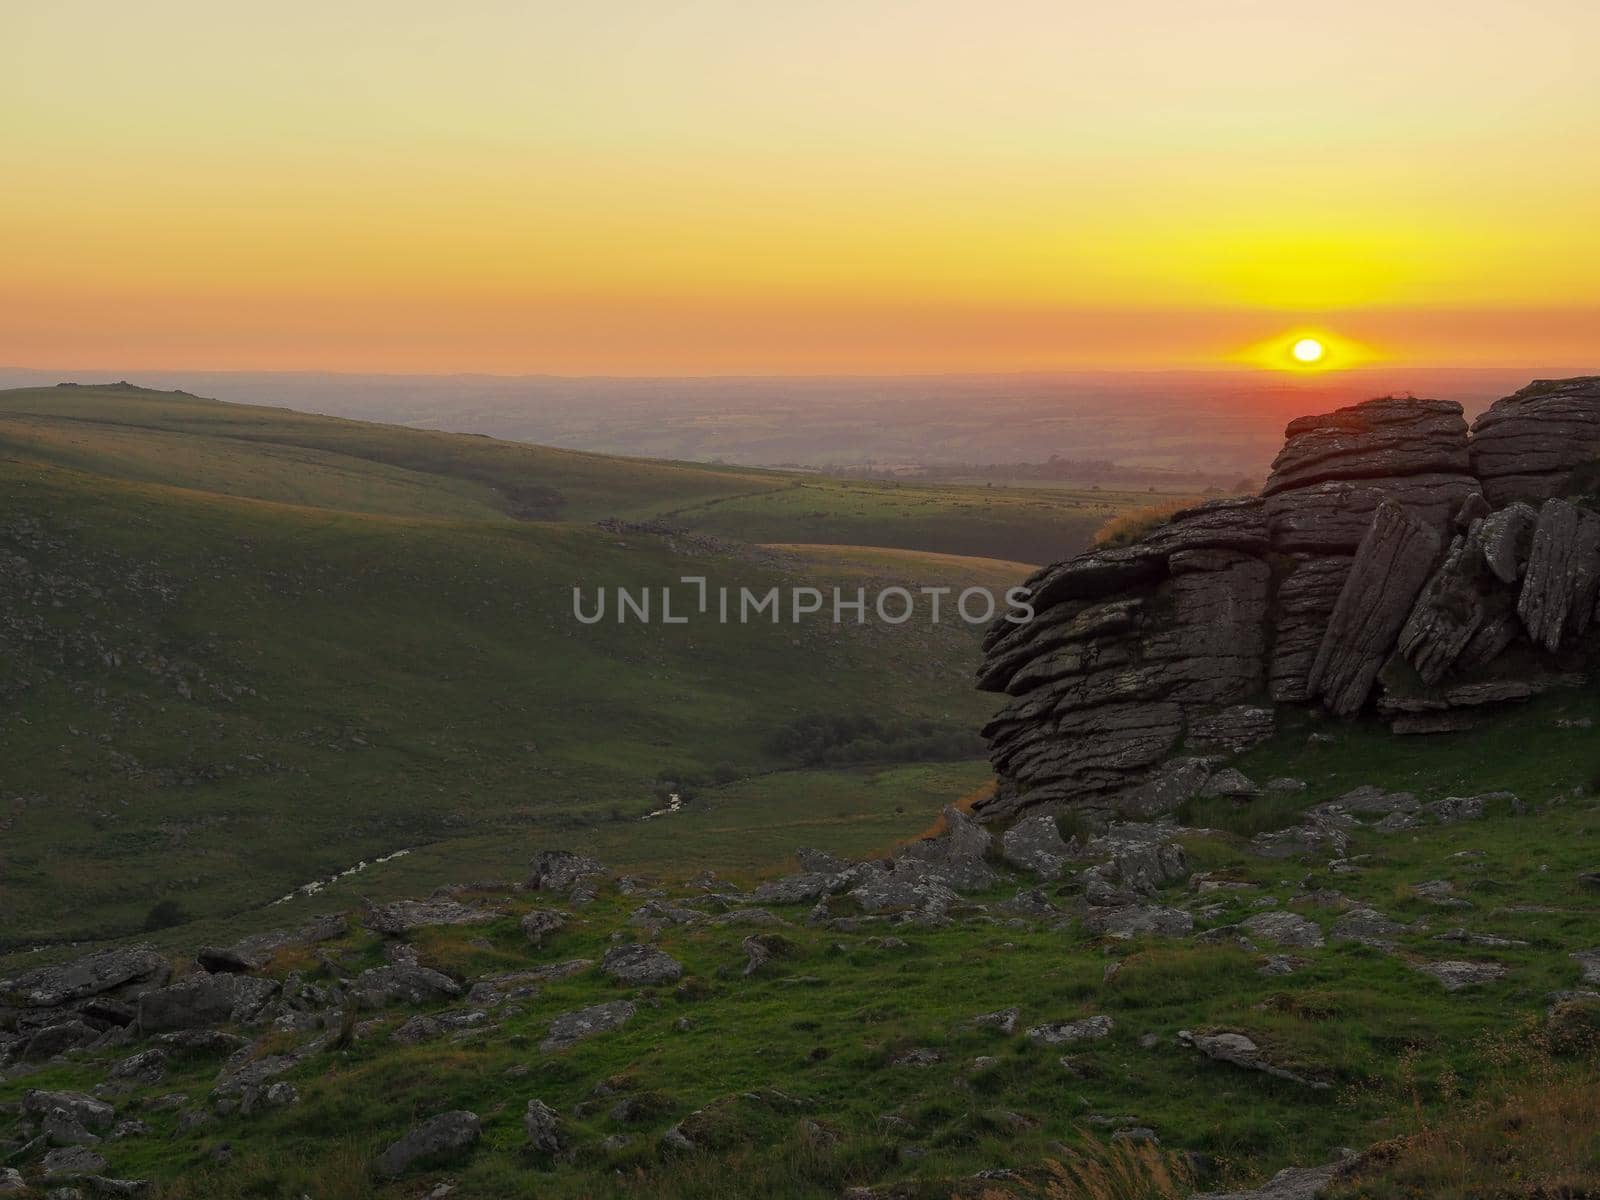 Sunset in a cloudless sky from Black Tor looking down over the West Okement Valley and across to Shelstone Tor and Sourton Tors, Dartmoor National Park, Devon, UK